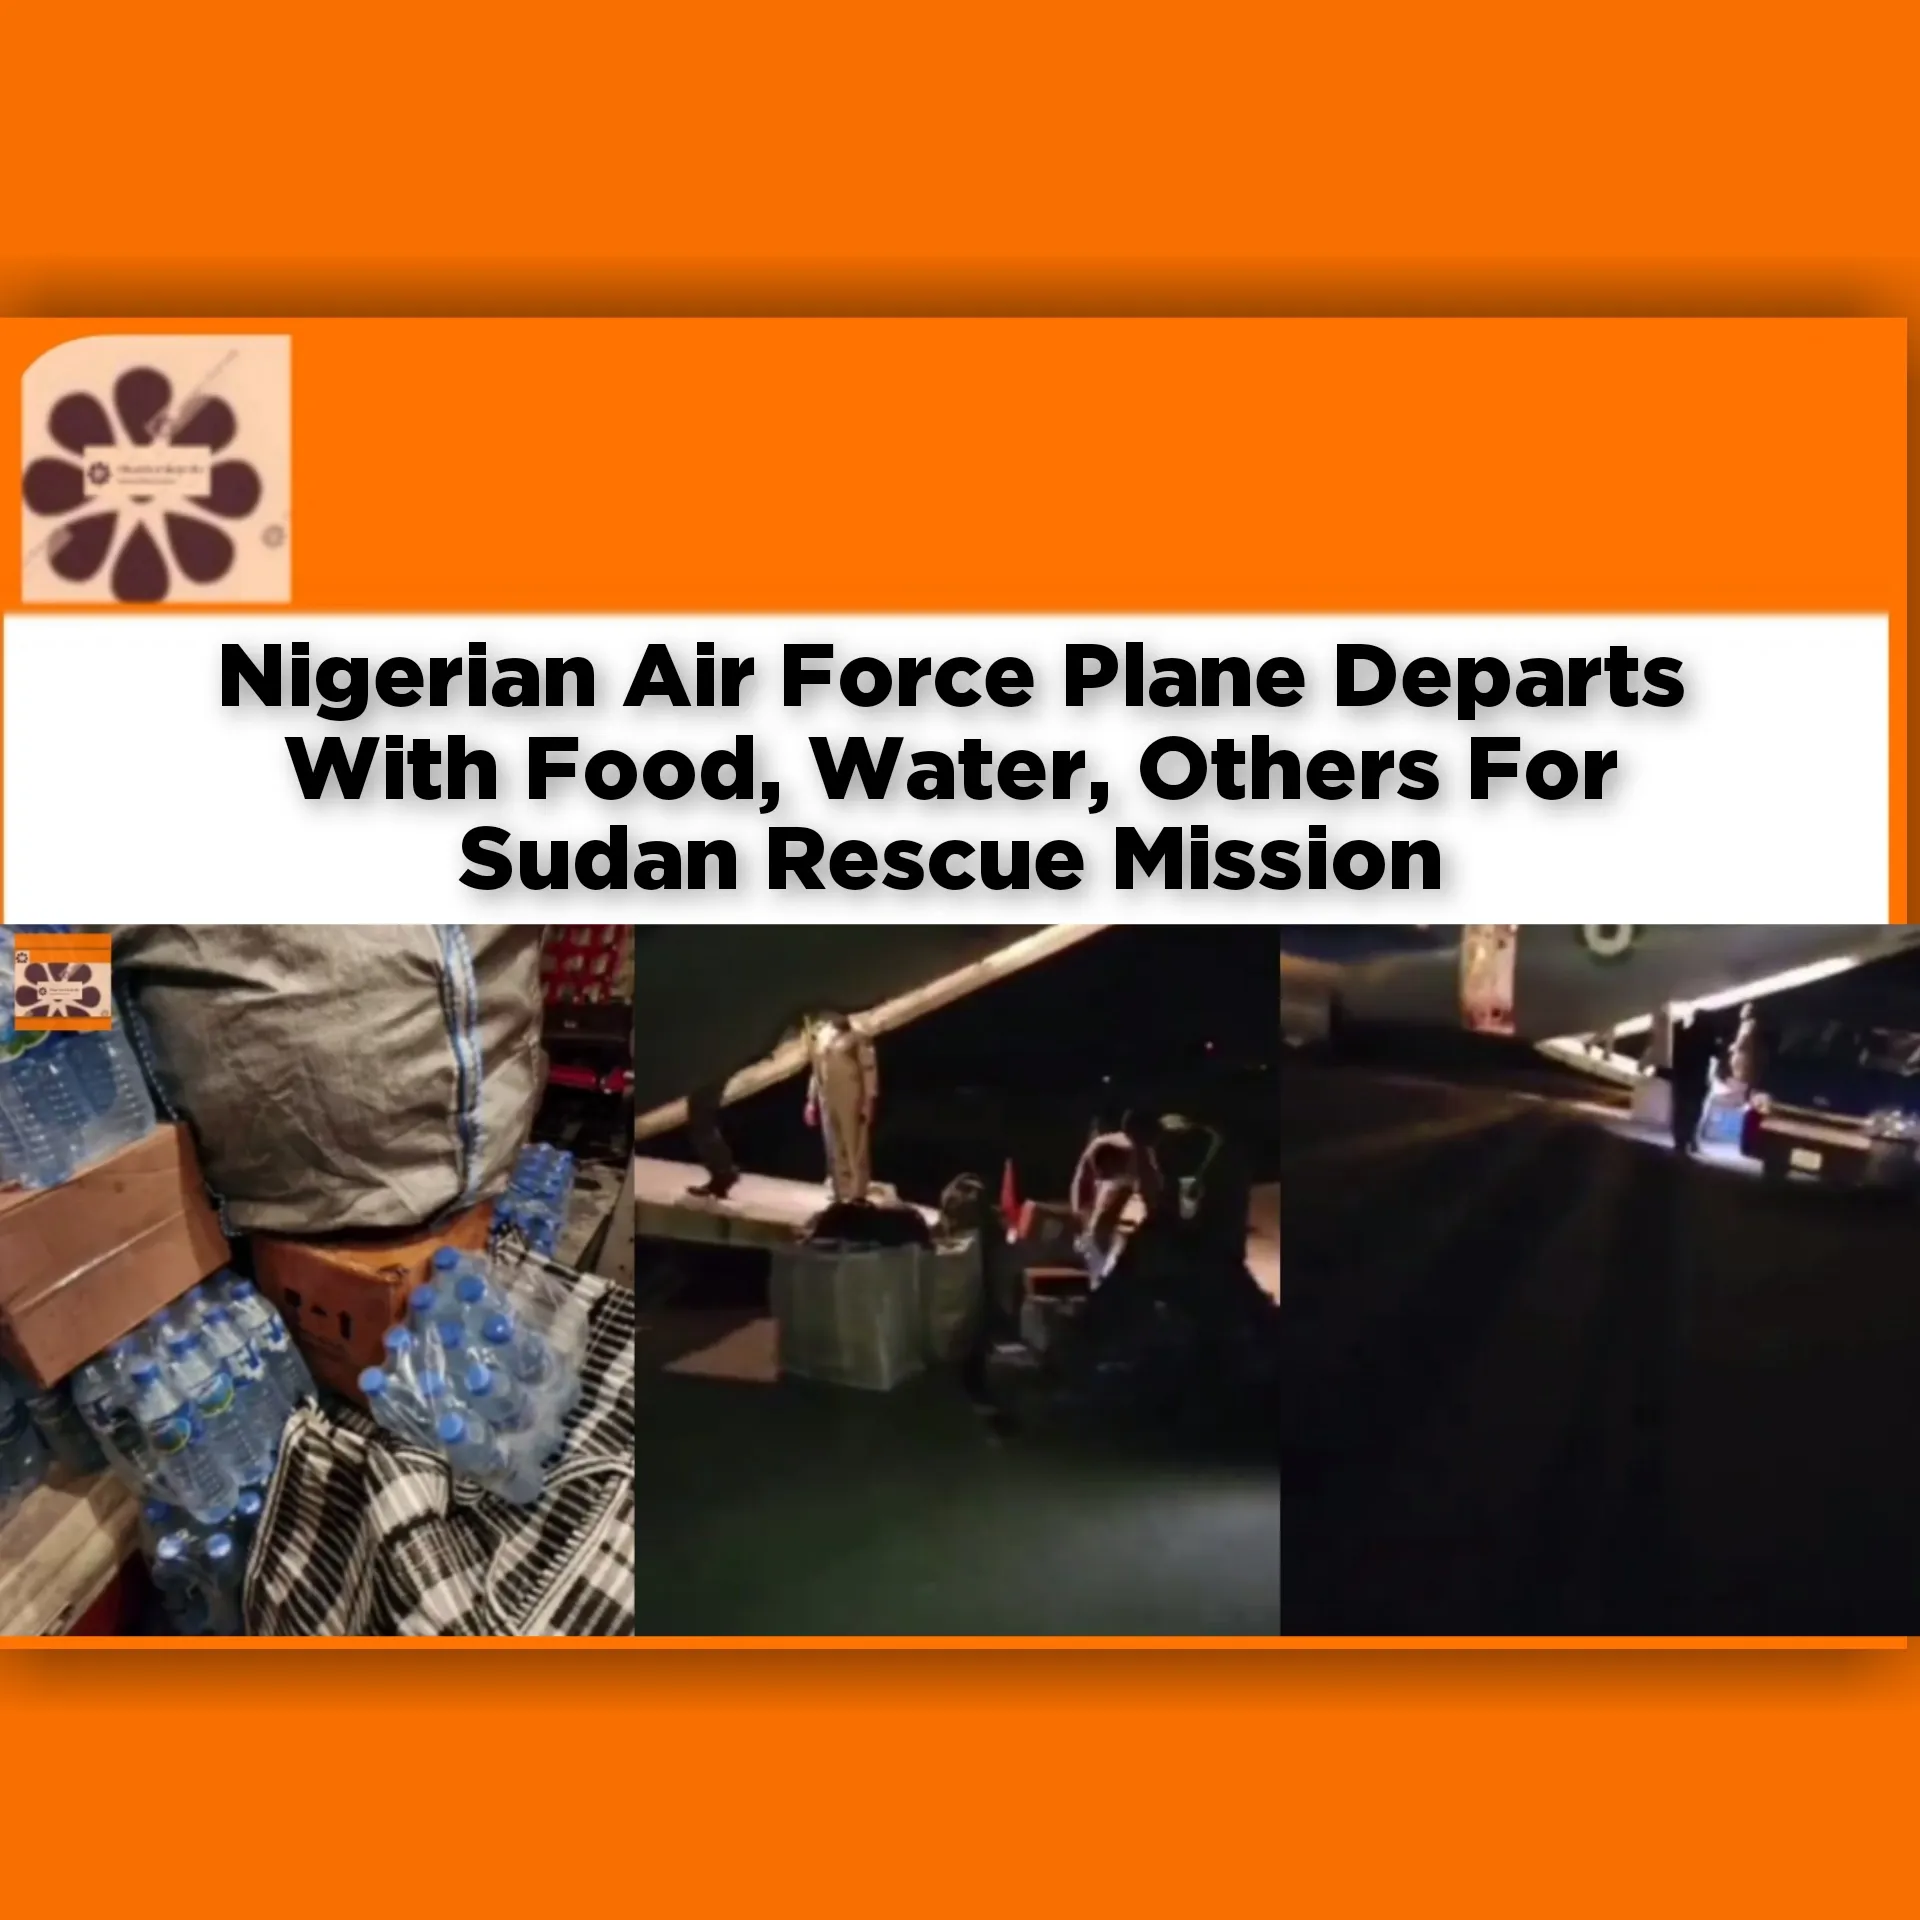 Nigerian Air Force Plane Departs With Food, Water, Others For Sudan Rescue Mission ~ OsazuwaAkonedo #Africa #breaking #departs #Egypt #Food #media #mission #NAF #Nigeria #Nigerian #Nigerians #Plane #security #Sudan #war